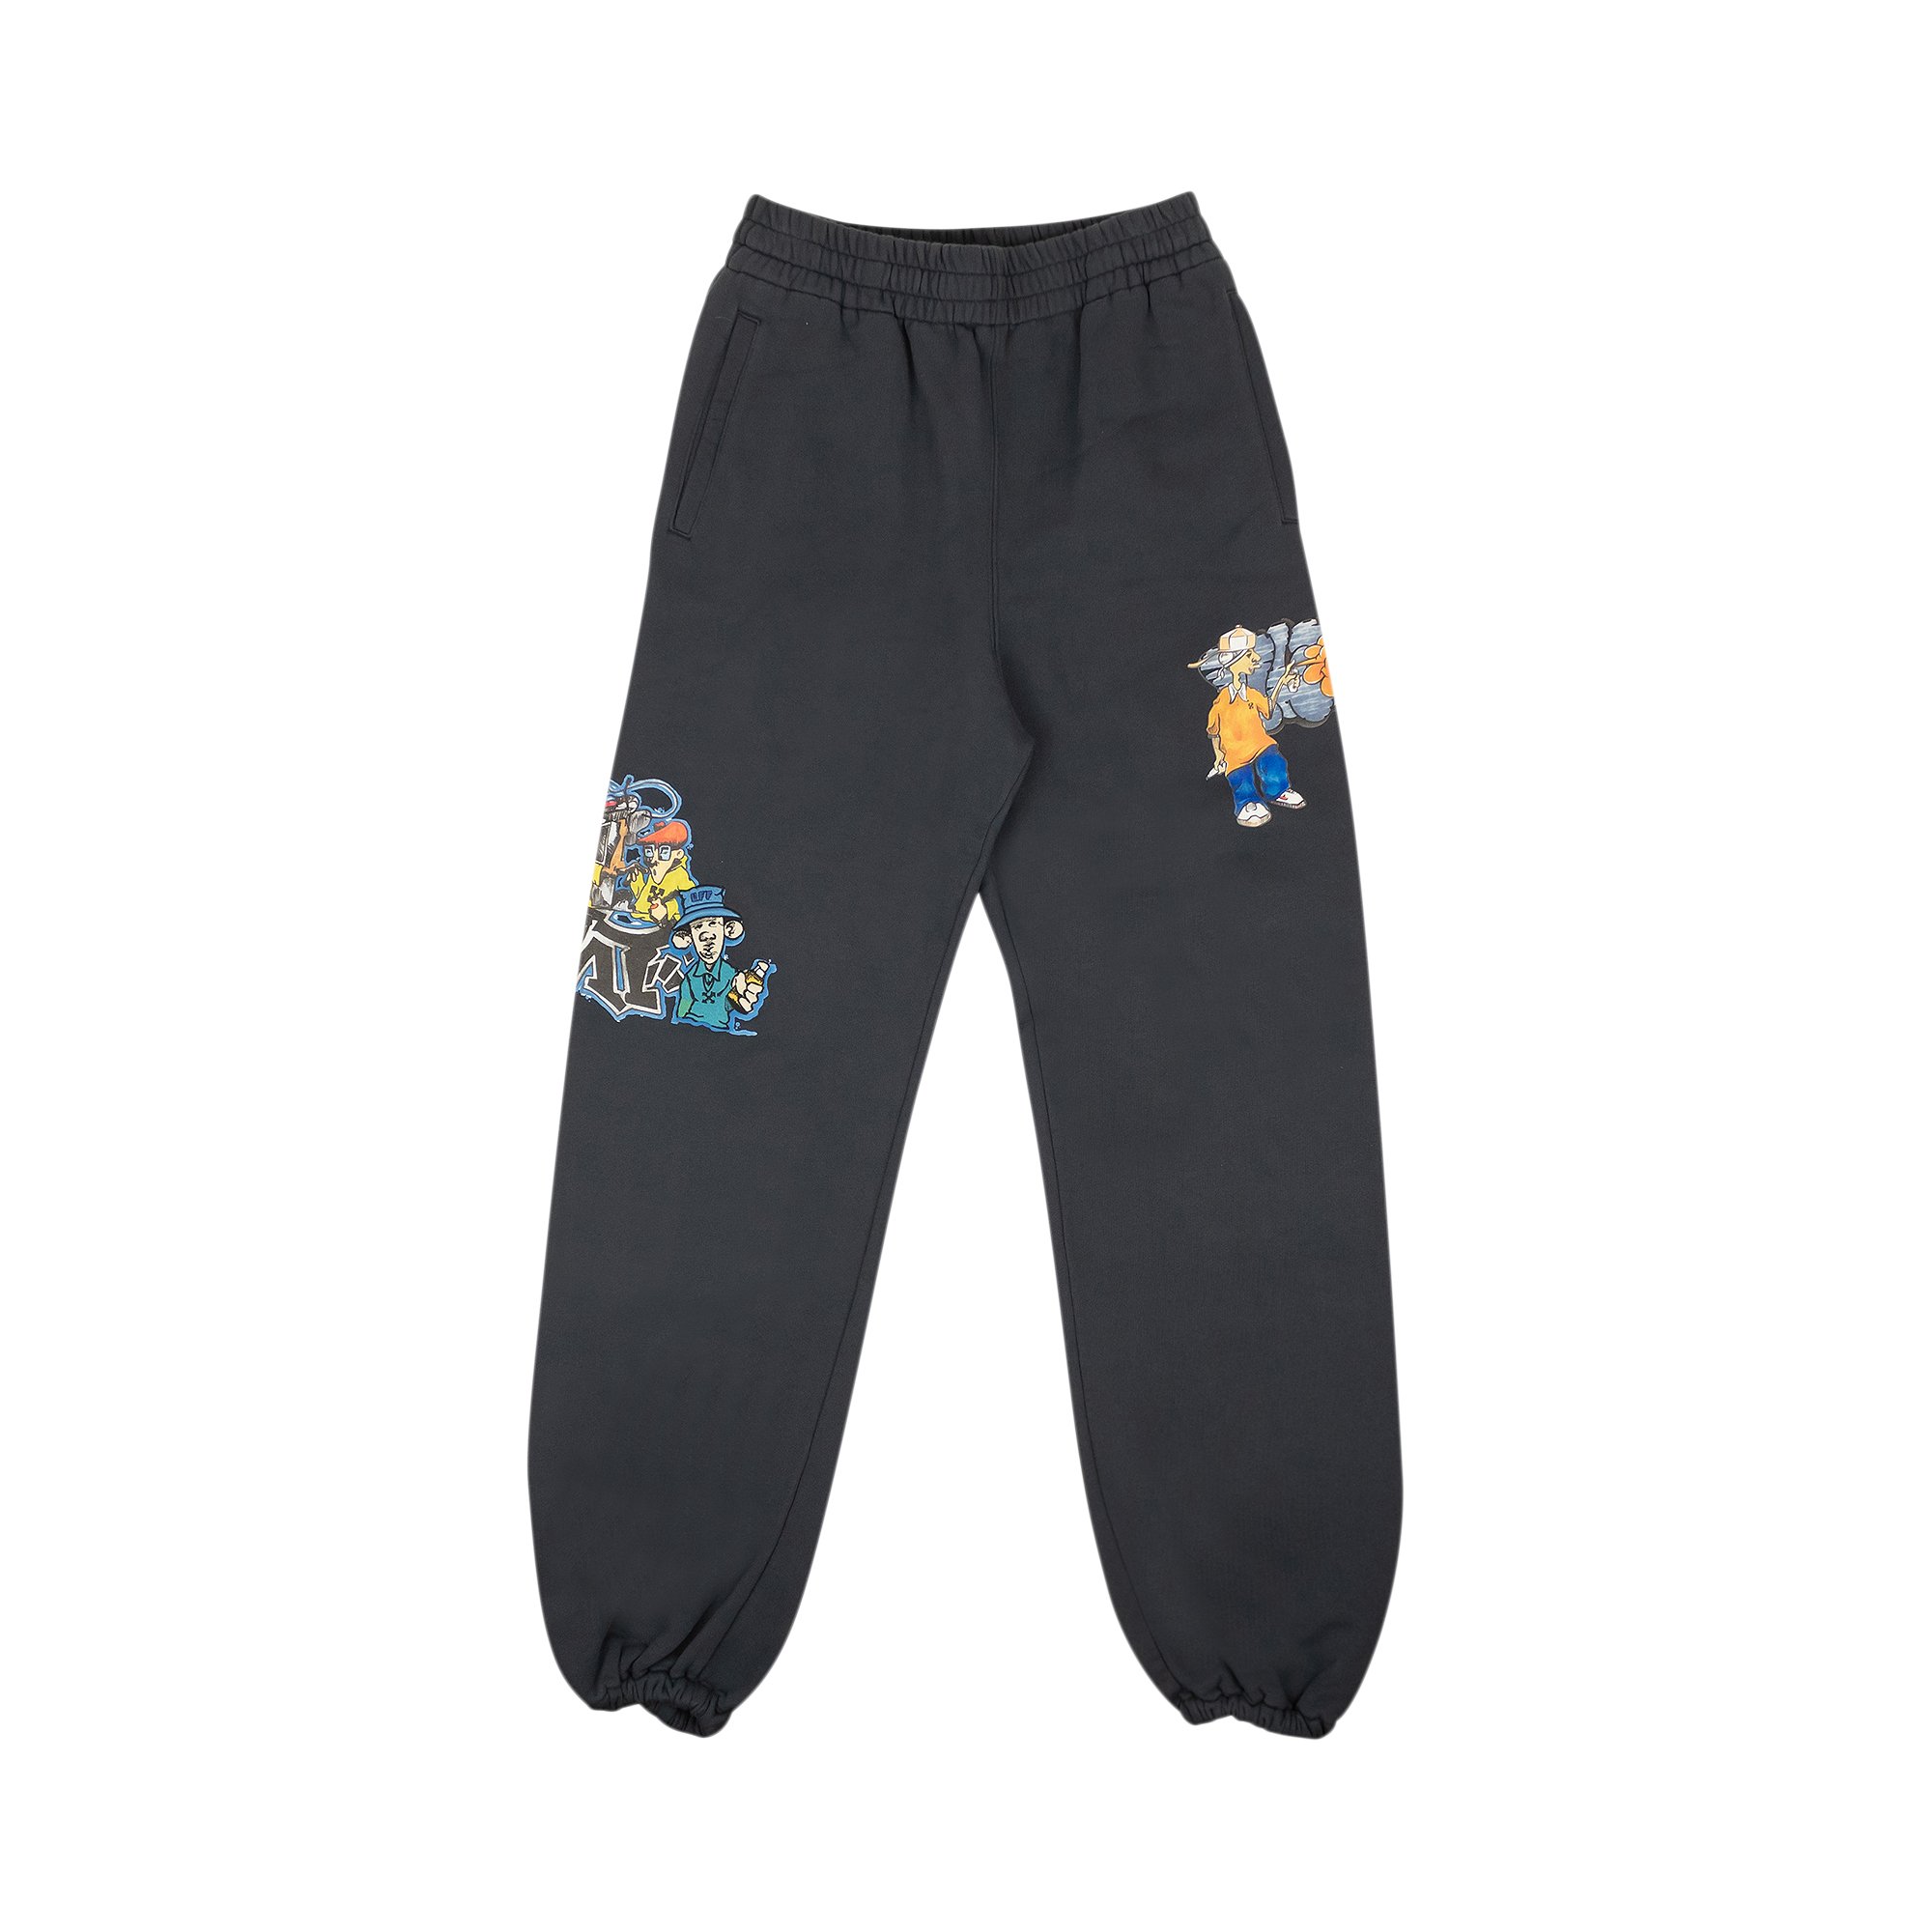 Buy Off-White Graff Pupp Slim Sweatpants 'Outer Space 